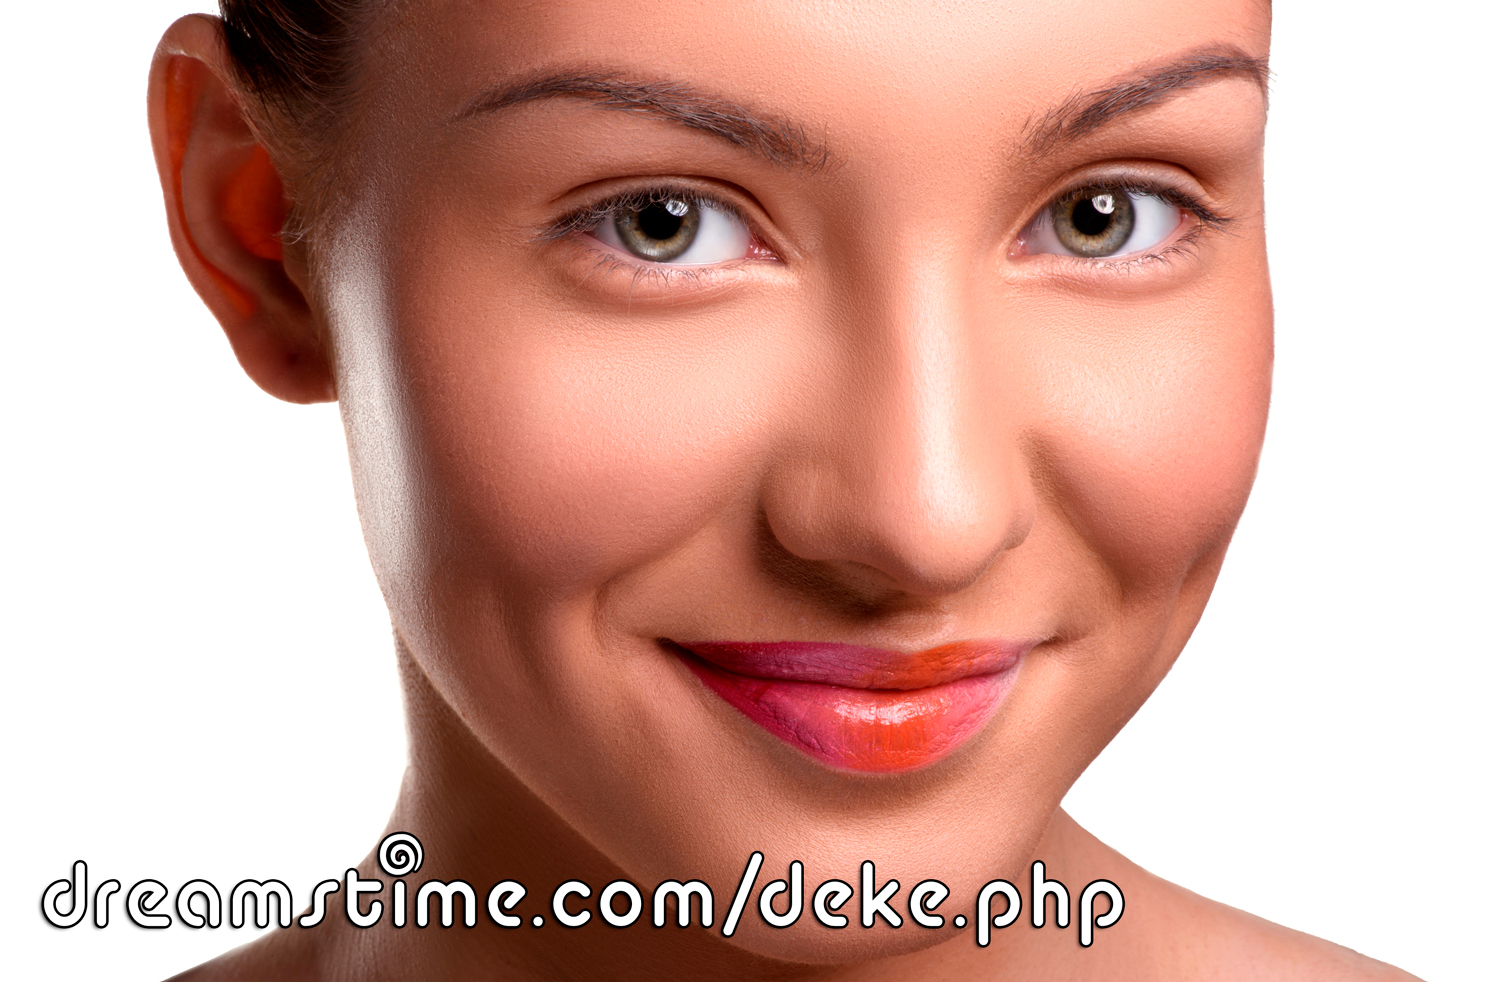 A portrait from Dreamstime.com